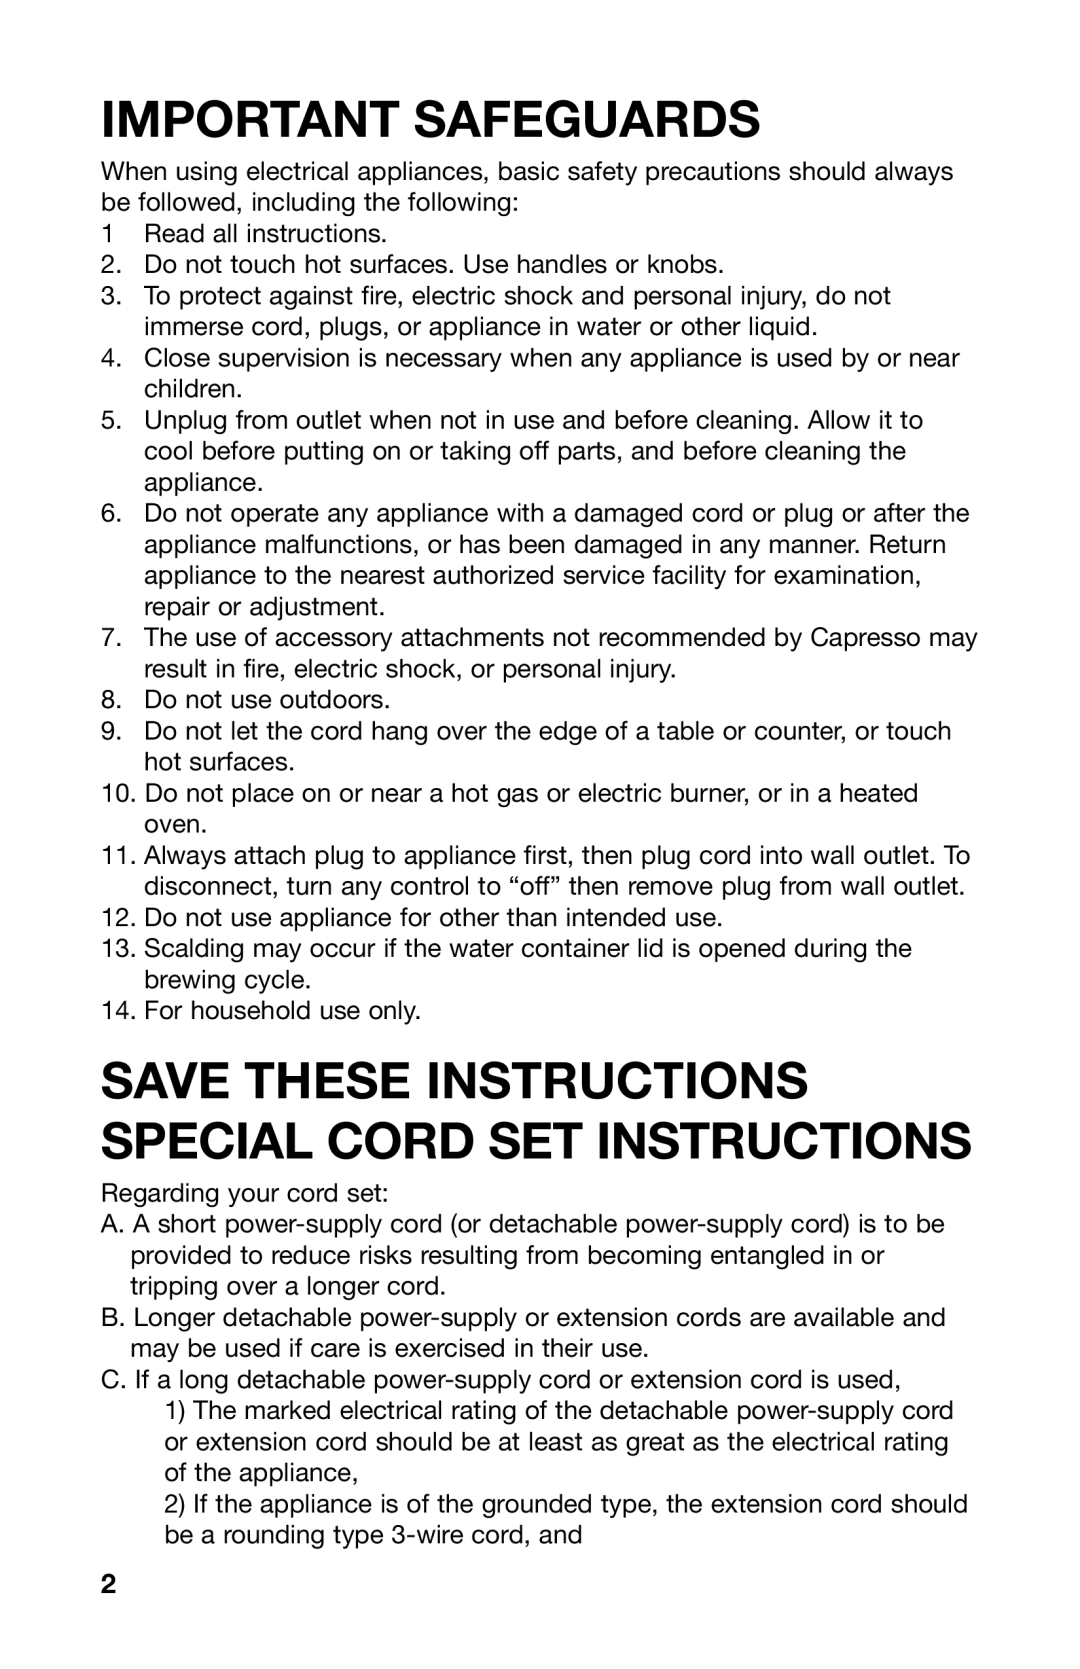 Capresso 476 warranty Important Safeguards, Save These Instructions Special Cord Set Instructions 